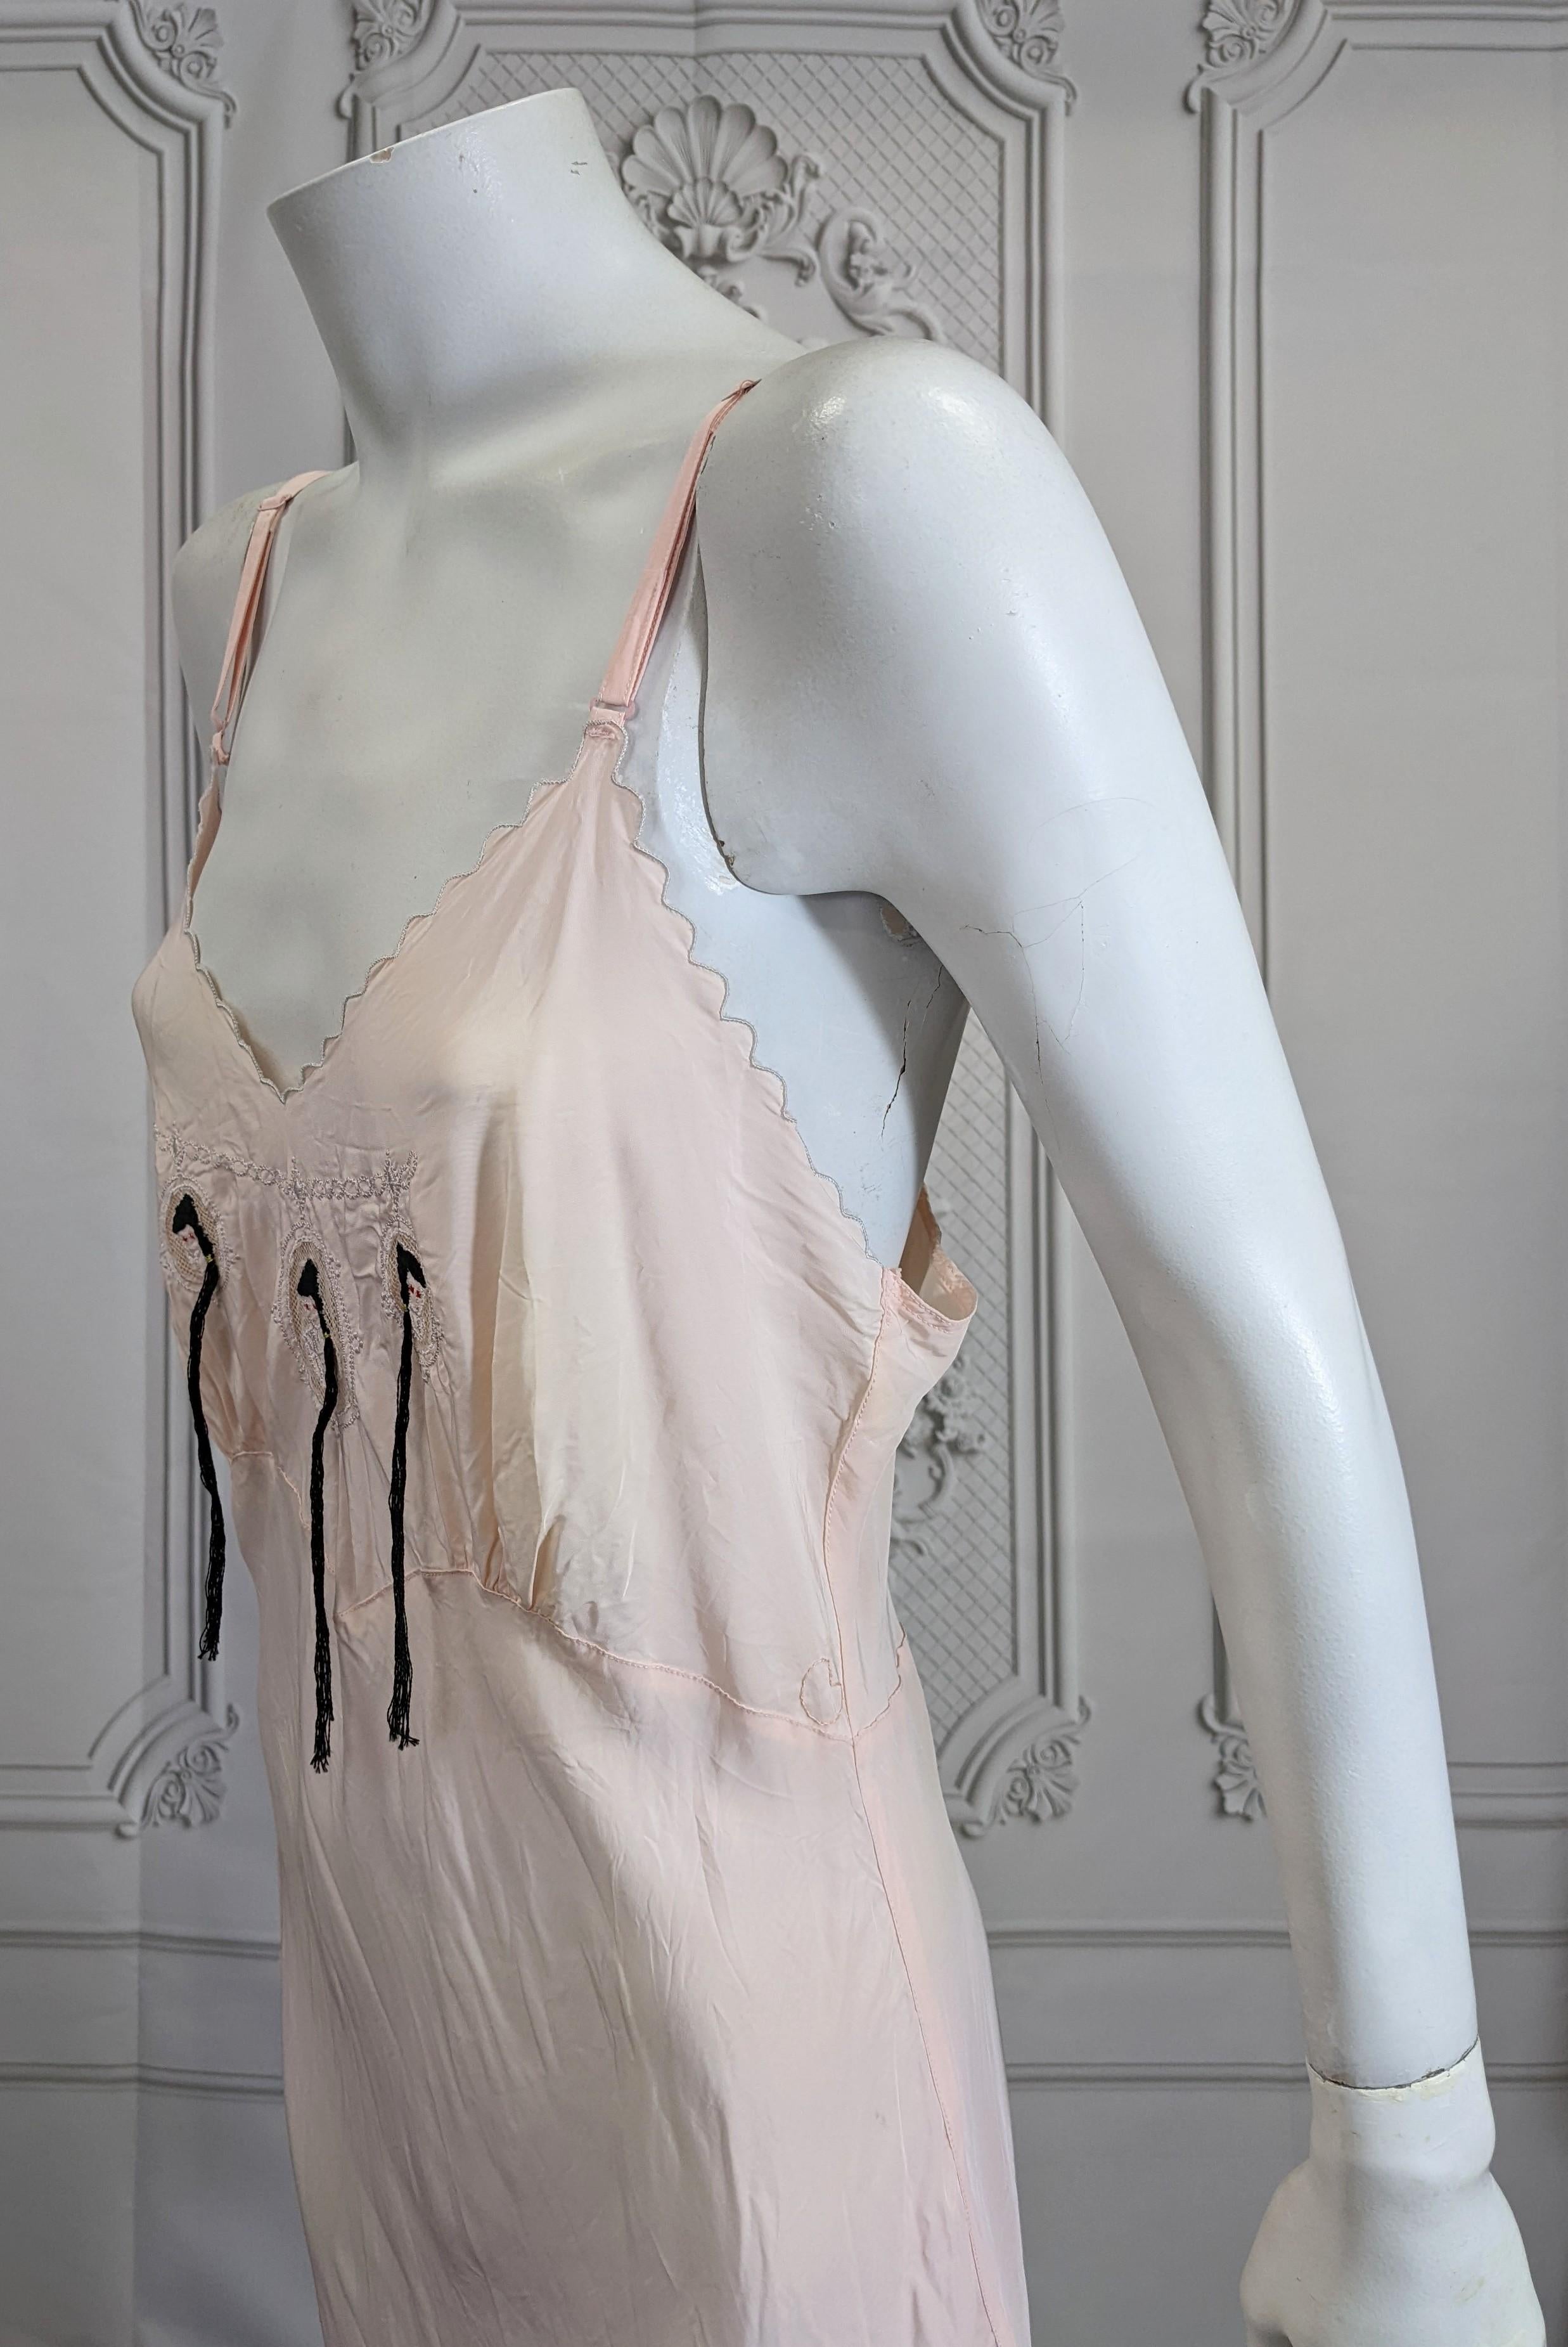 Art Deco Slip Dress, Upcycled by Studio VL. Period 1930's rayon pink slip dress with cameo embroidery of 3 maidens. Hand embroidered hair and ponytails have been added to the 3 maidens in black cotton with red pupils for a twisted accent. 
Small